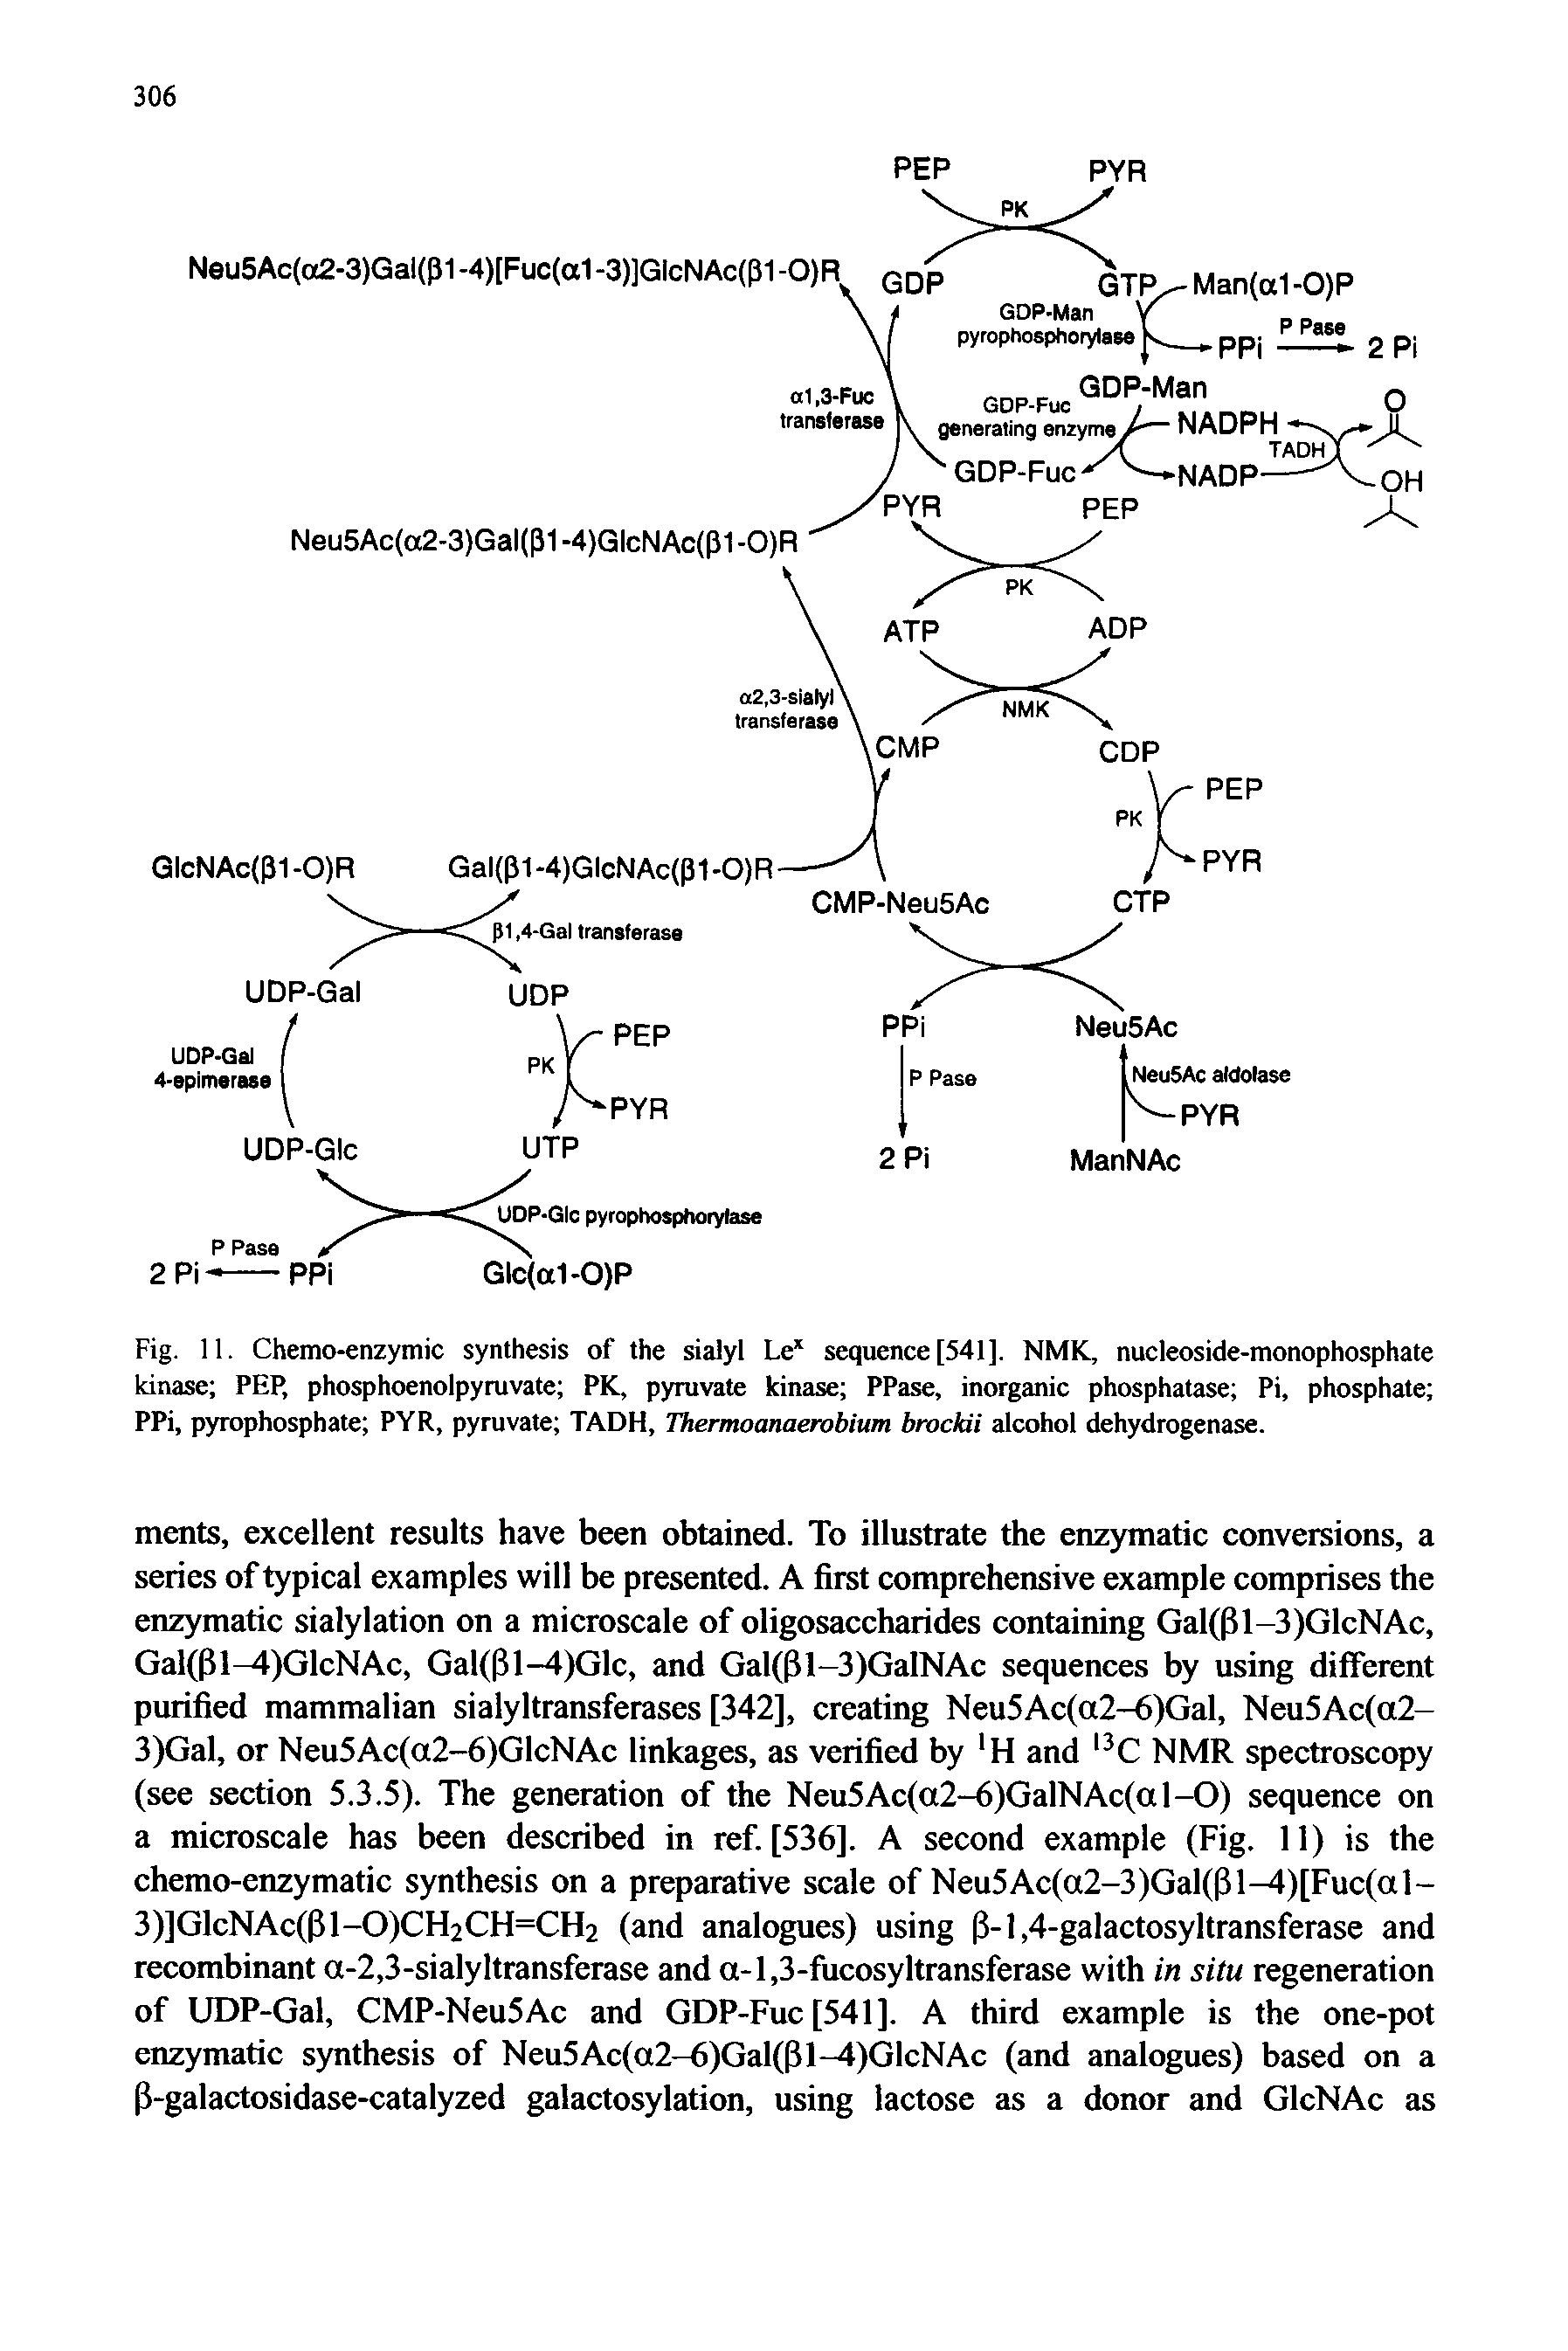 Fig. 11. Chemo-enzymic synthesis of the sialyl Le sequence [541]. NMK, nucleoside-monophosphate kinase PEP, phosphoenolpyruvate PK, pyruvate kinase PPase, inorganic phosphatase Pi, phosphate PPi, pyrophosphate PYR, pyruvate TADH, Thermoanaerobium broddi alcohol dehydrogenase.